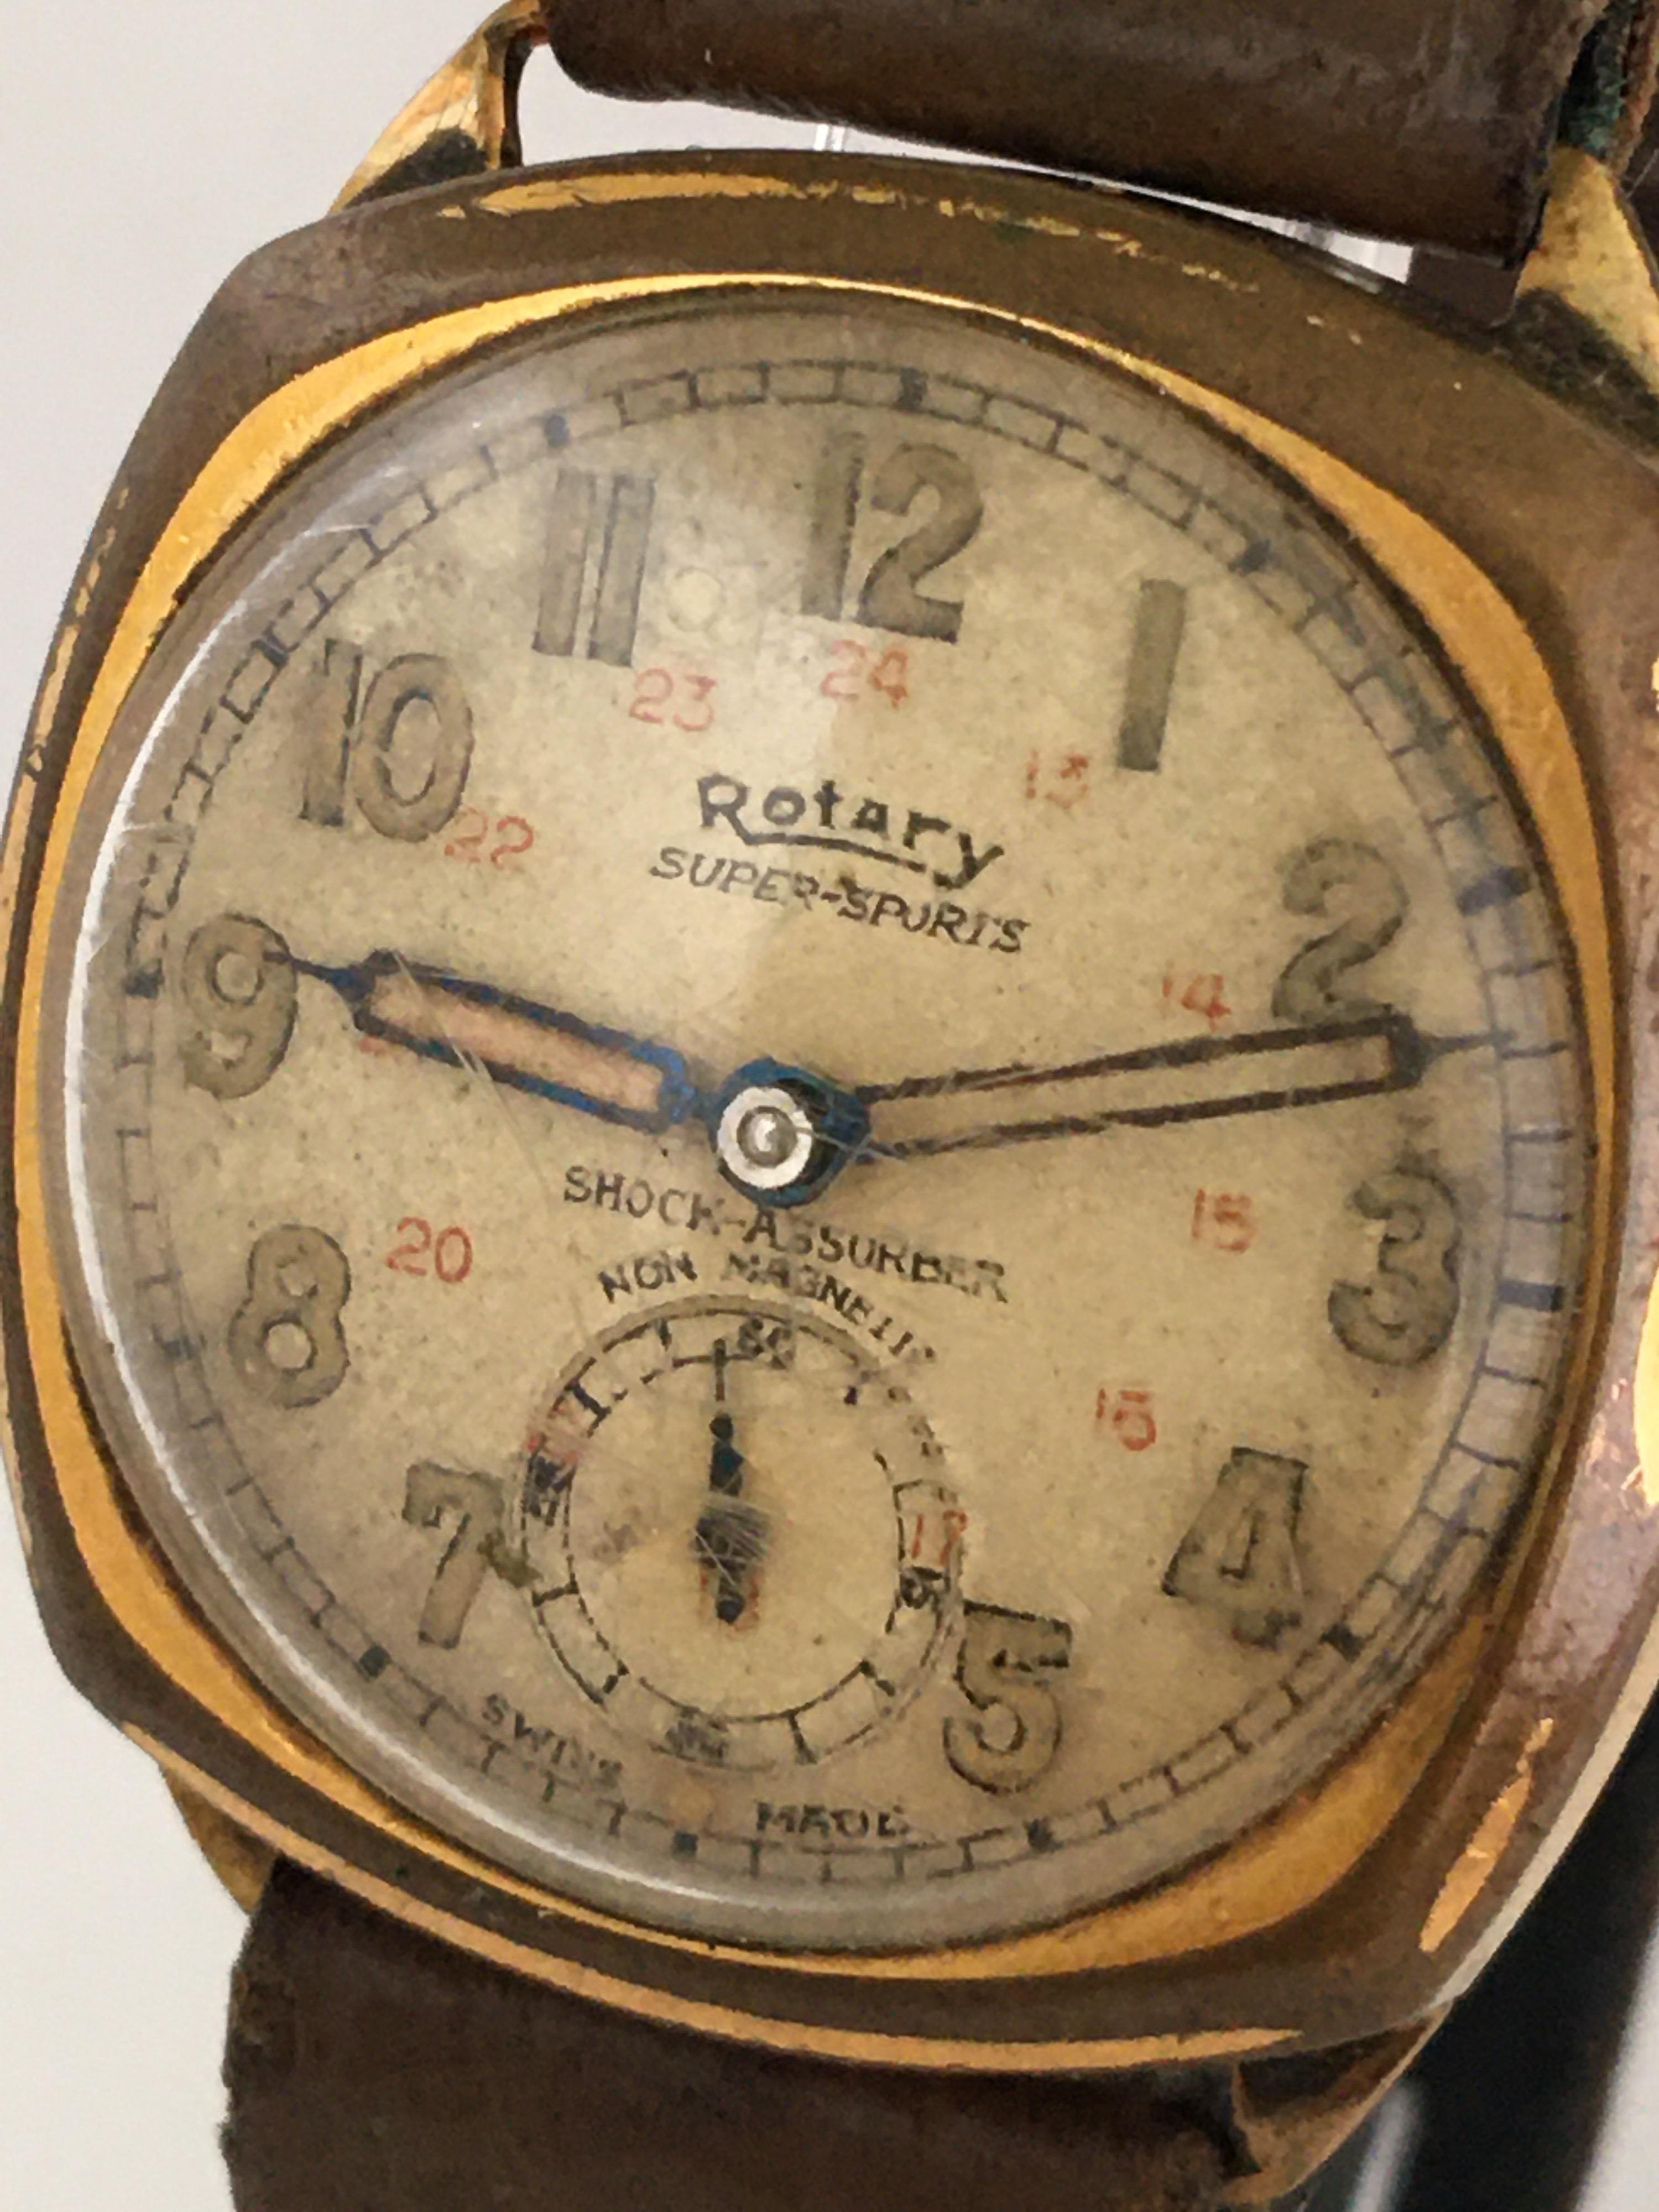 1930s Vintage Rotary24 Super Sports Gold-Plated Cushion Military Watch 5